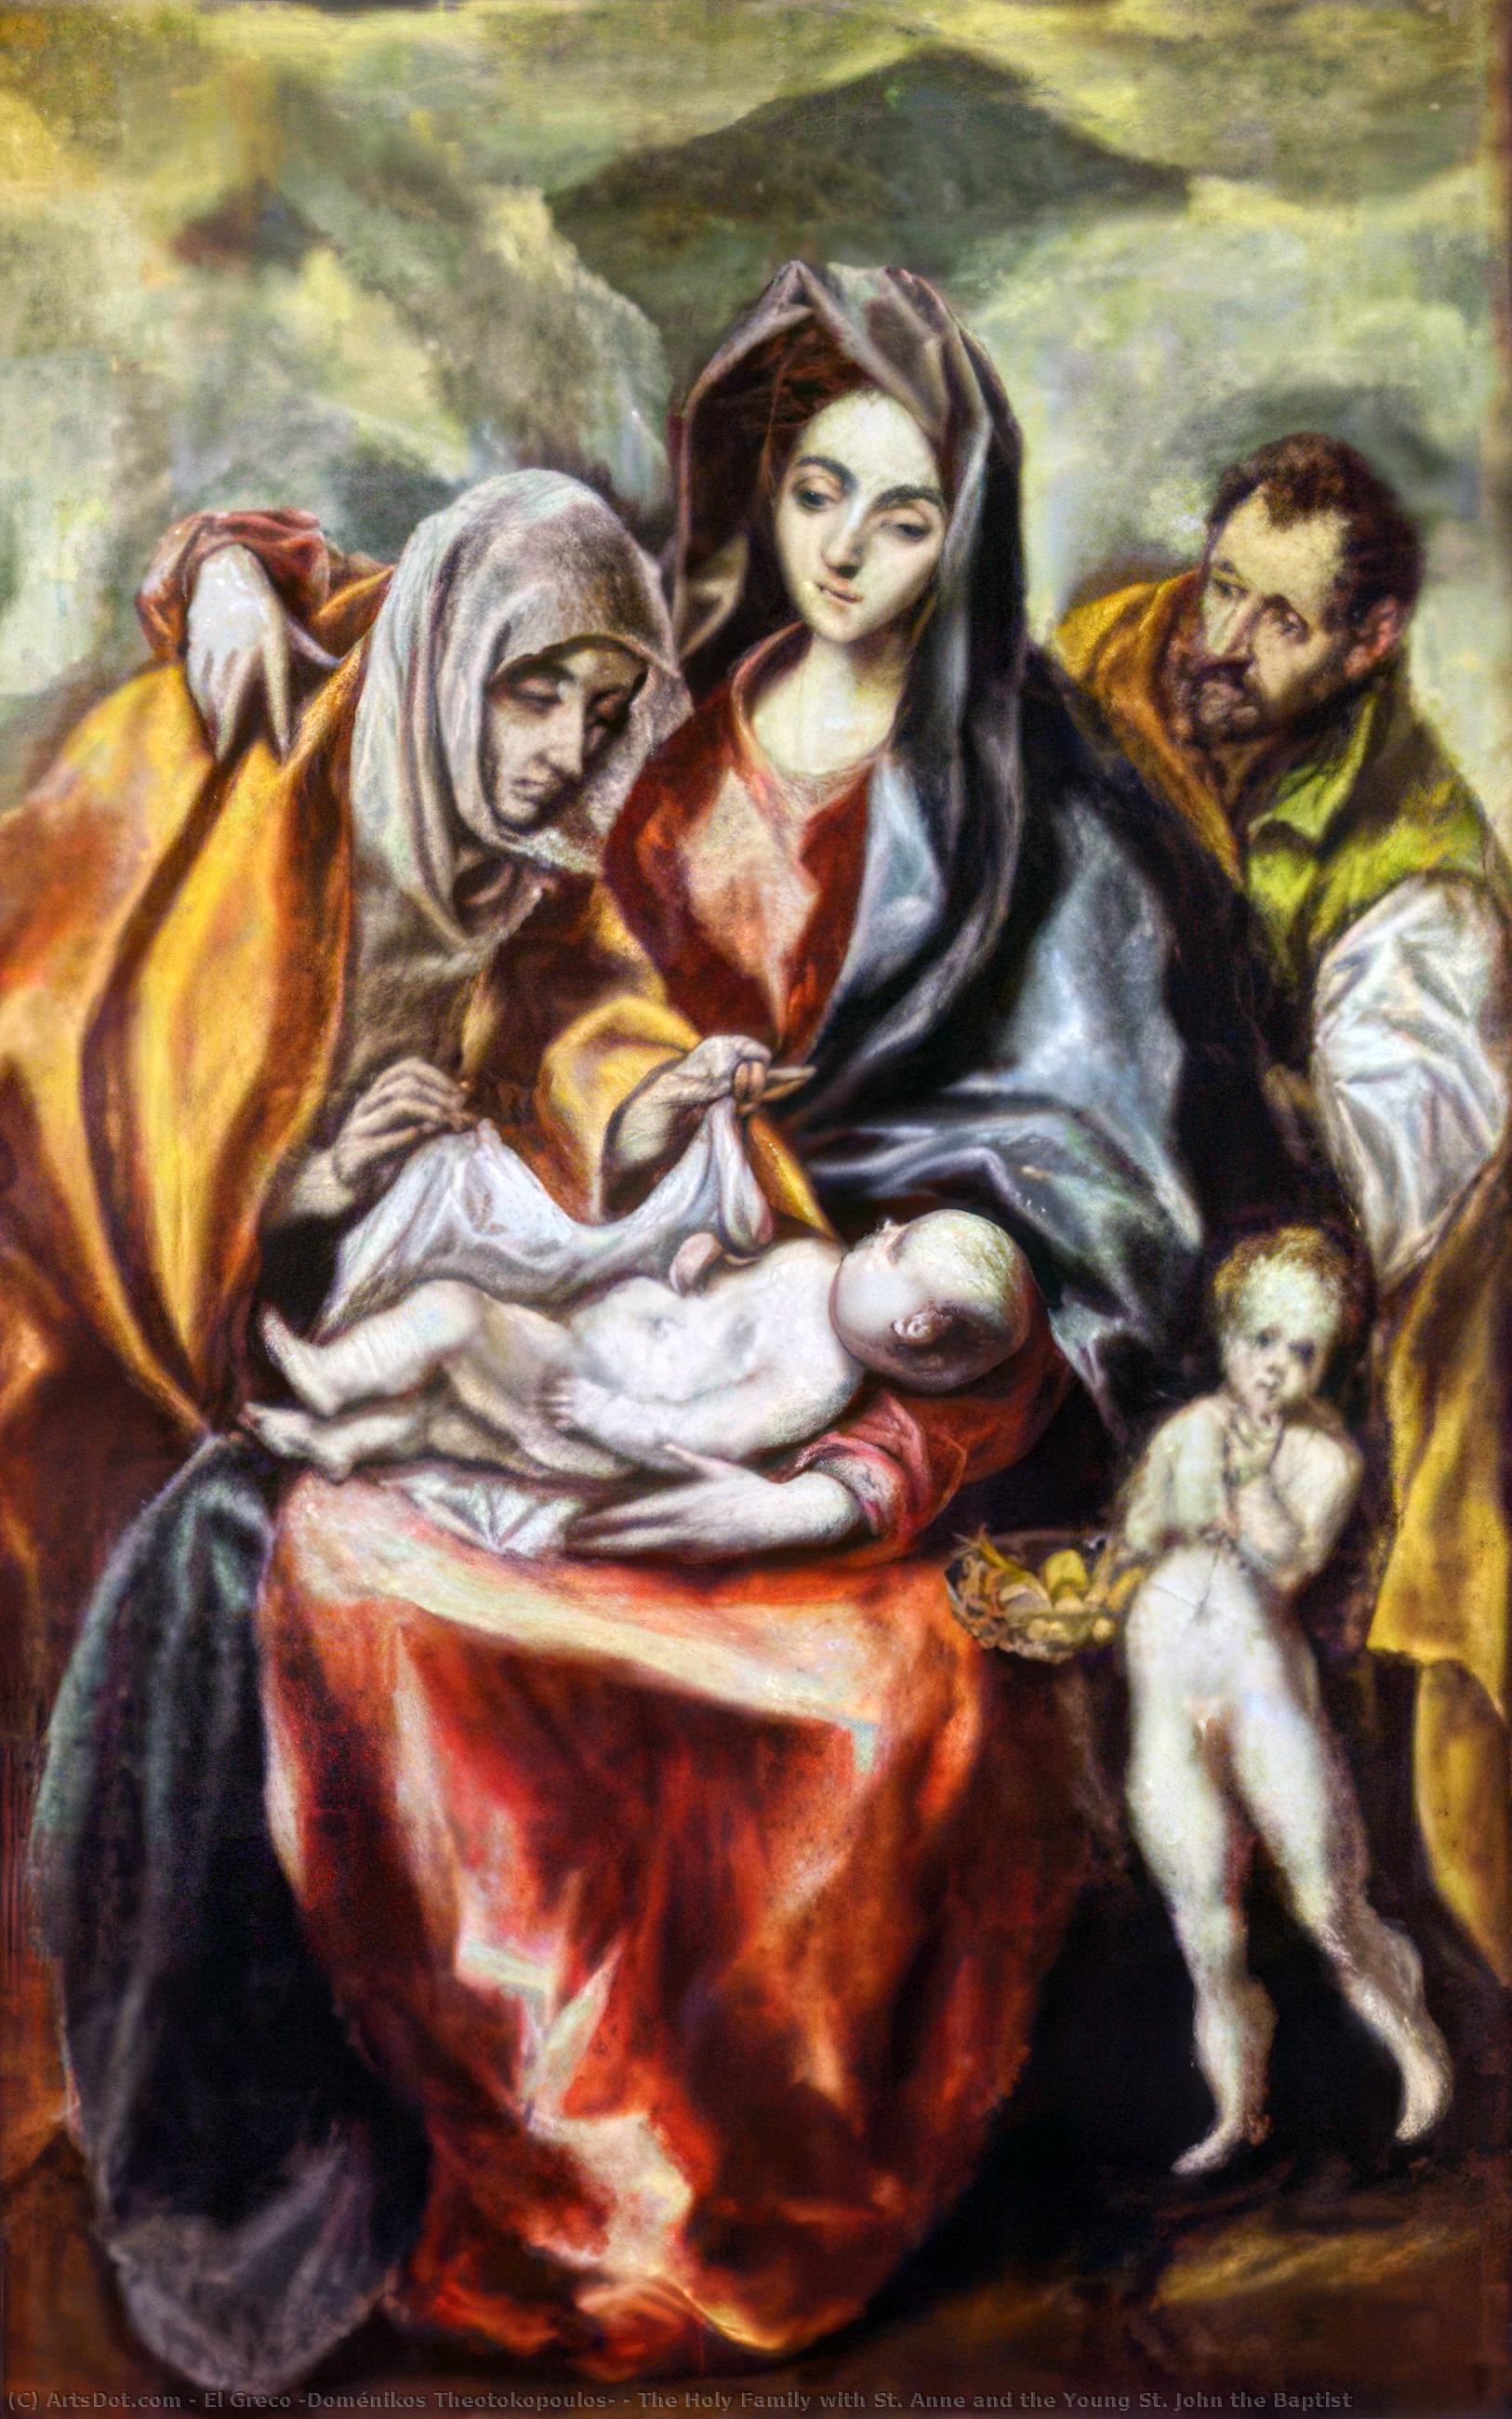 WikiOO.org - Encyclopedia of Fine Arts - Maleri, Artwork El Greco (Doménikos Theotokopoulos) - The Holy Family with St. Anne and the Young St. John the Baptist